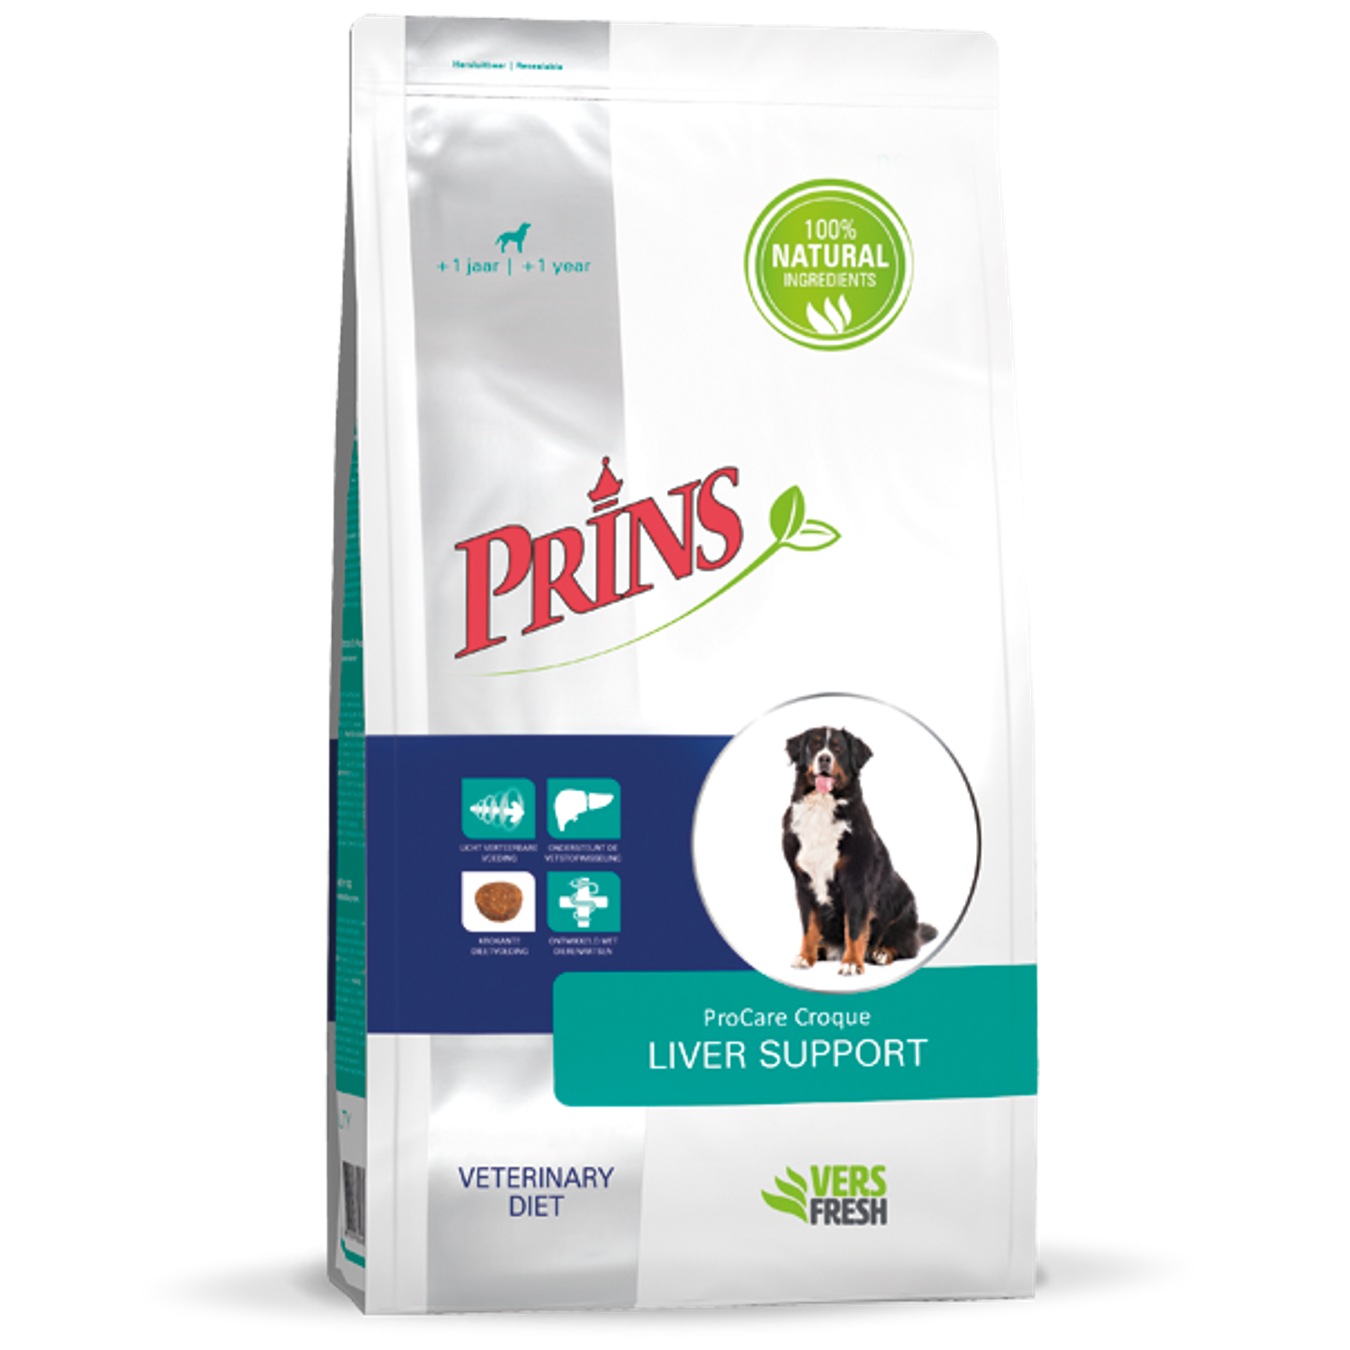 Prins ProCare Croque Diet LIVER SUPPORT Dry Dog Food With Poultry, 3kg